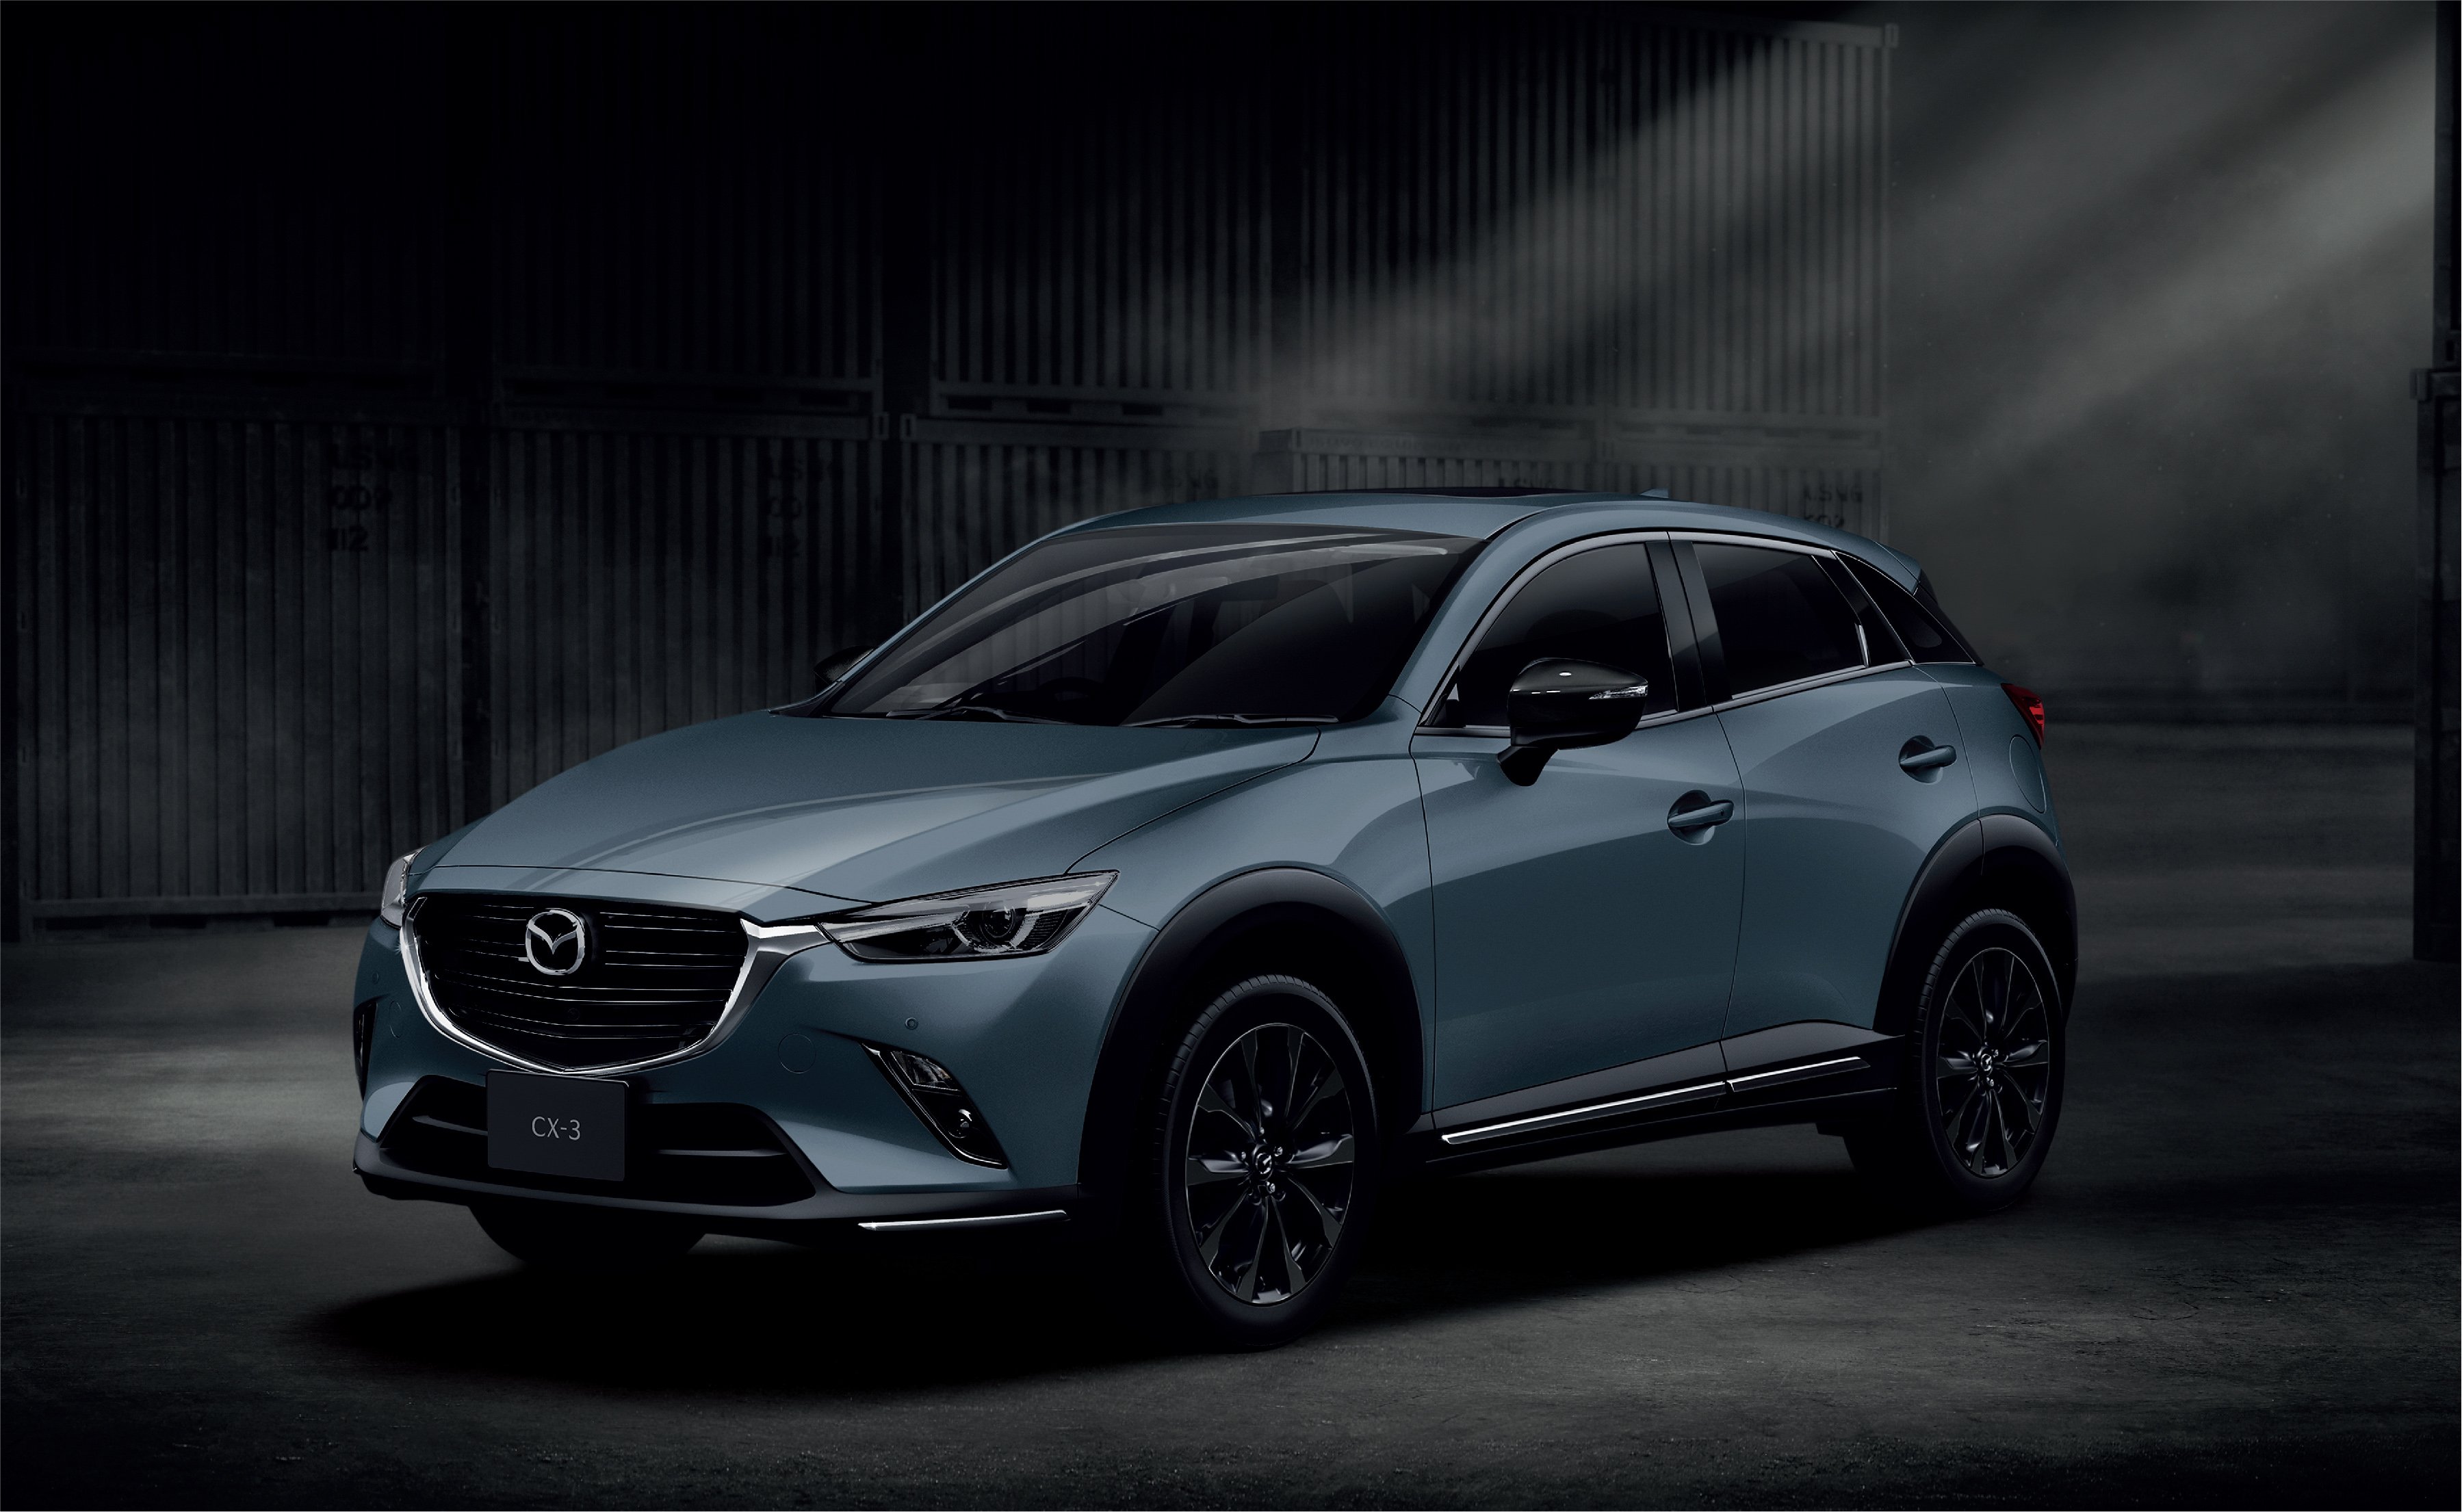 mazdacx-3_carbonedition_1